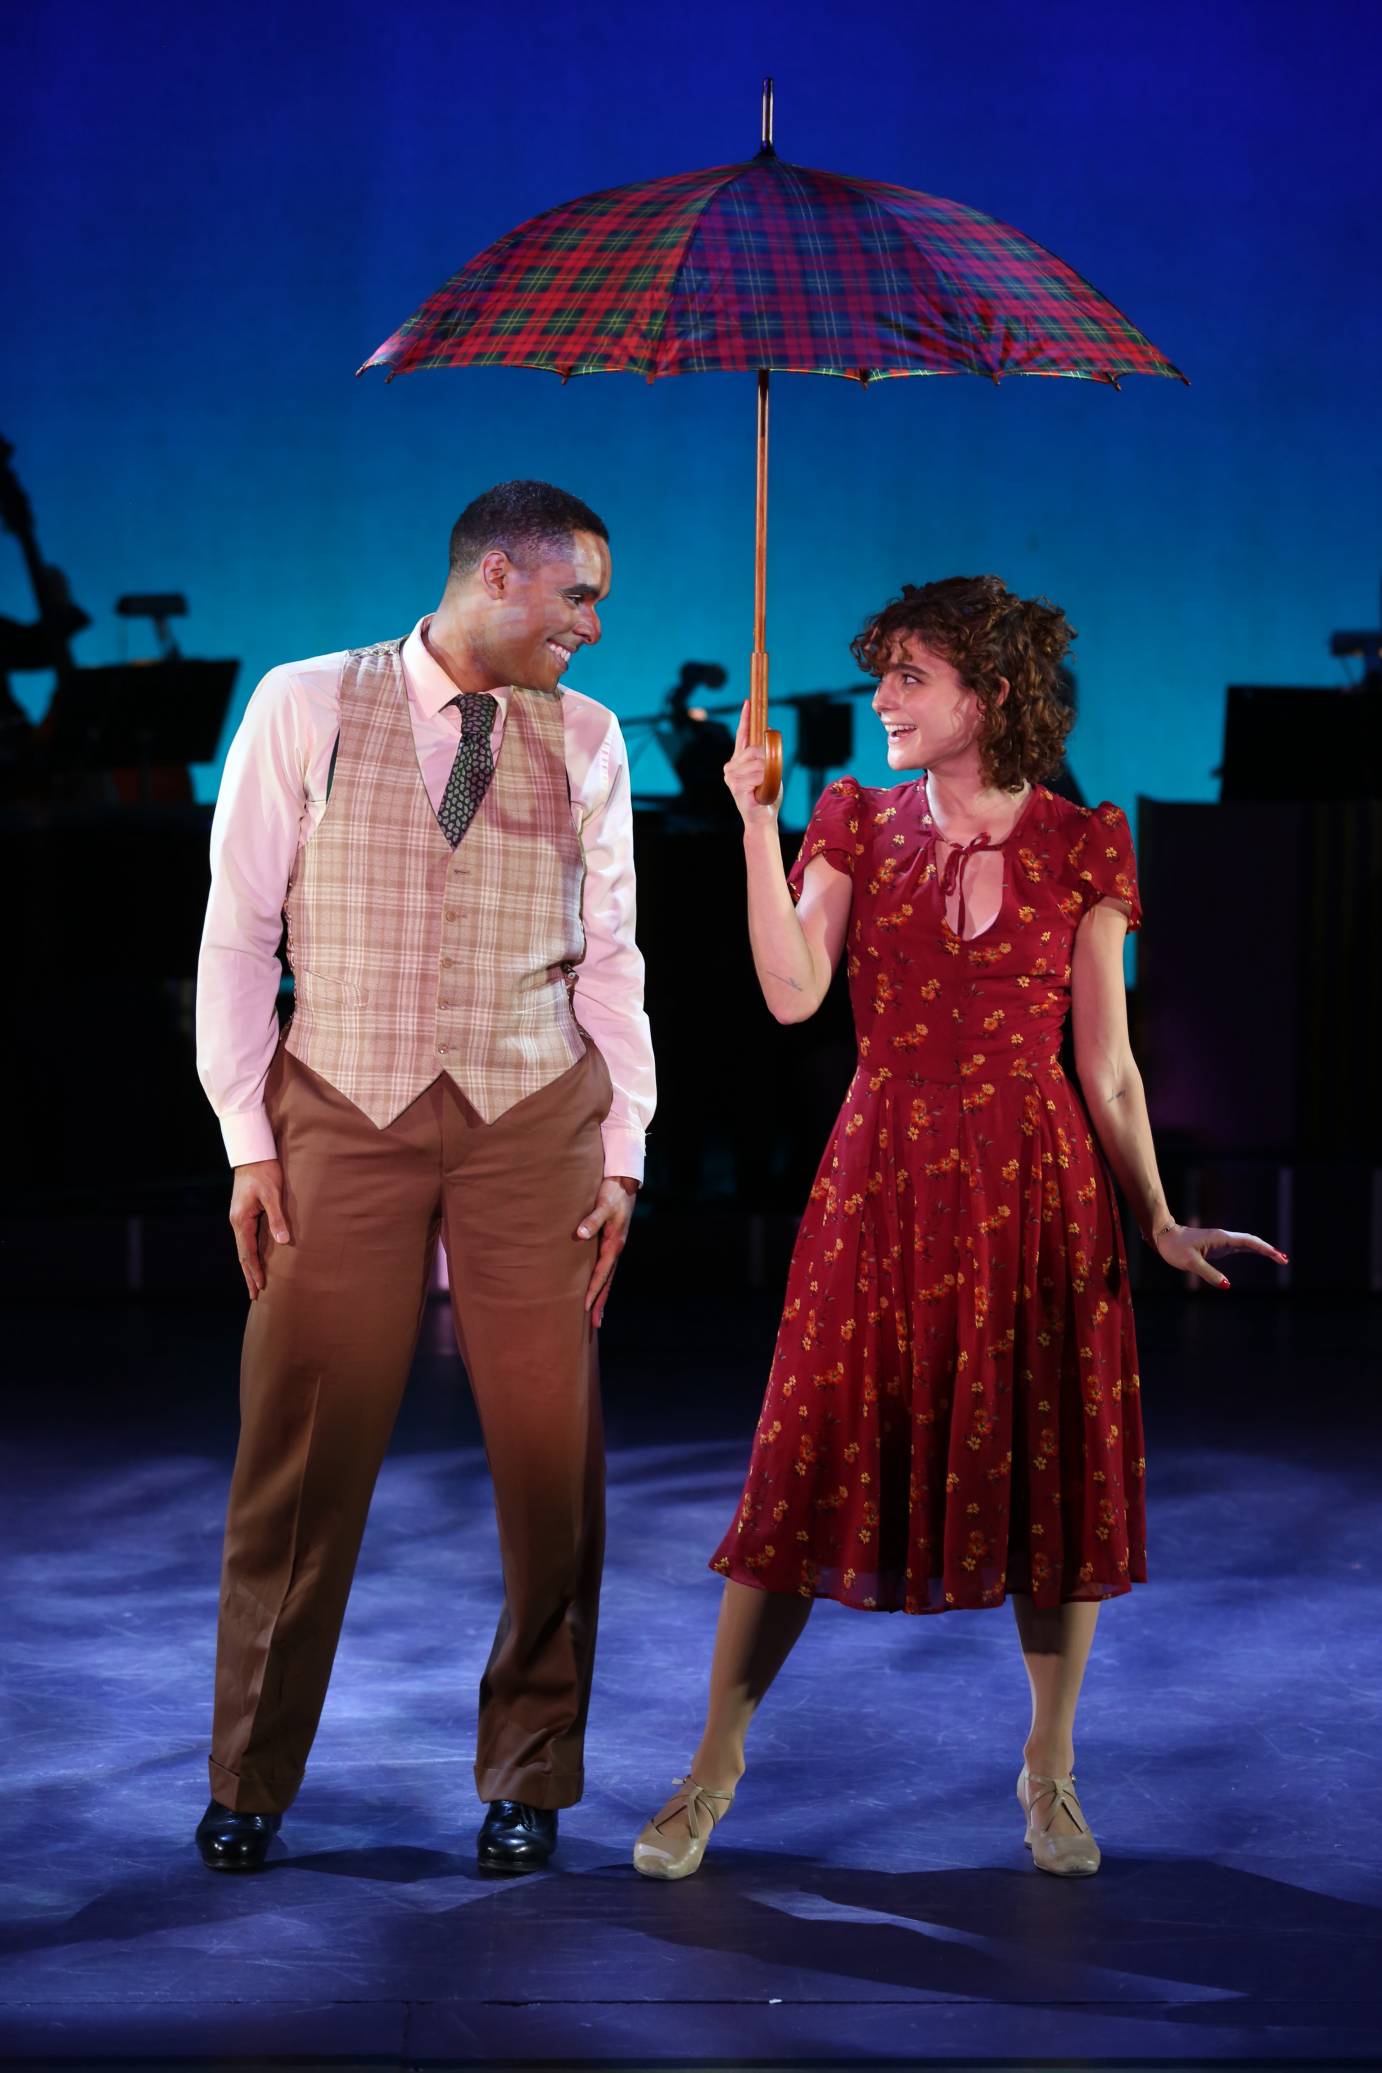 In a red printed dress, Melanie Moore holds an umbrella over a vest-clas man. Both are looking at each other, smiling.